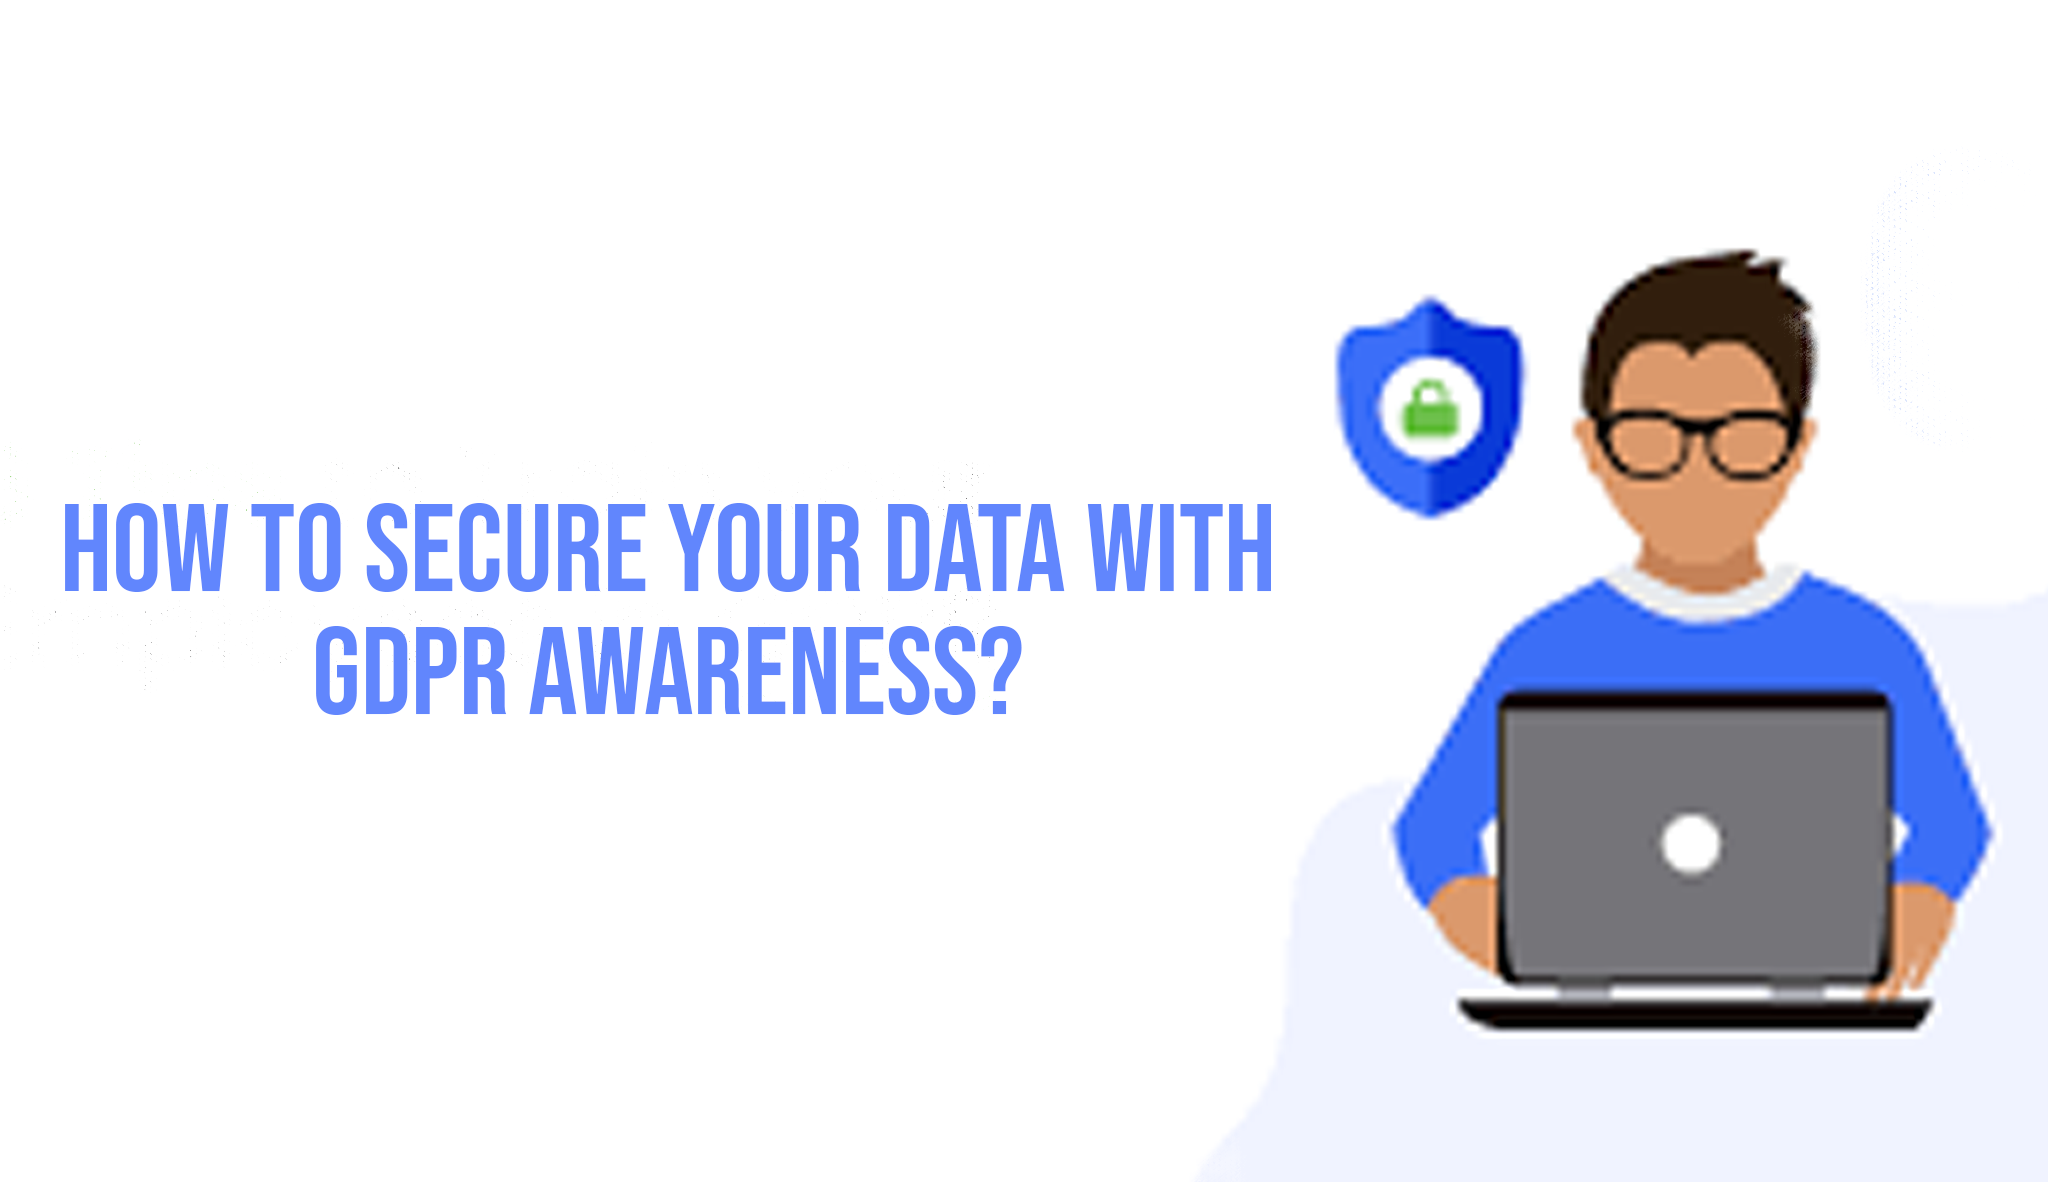 How to Secure Your Data With GDPR Awareness - Verrolyne Training